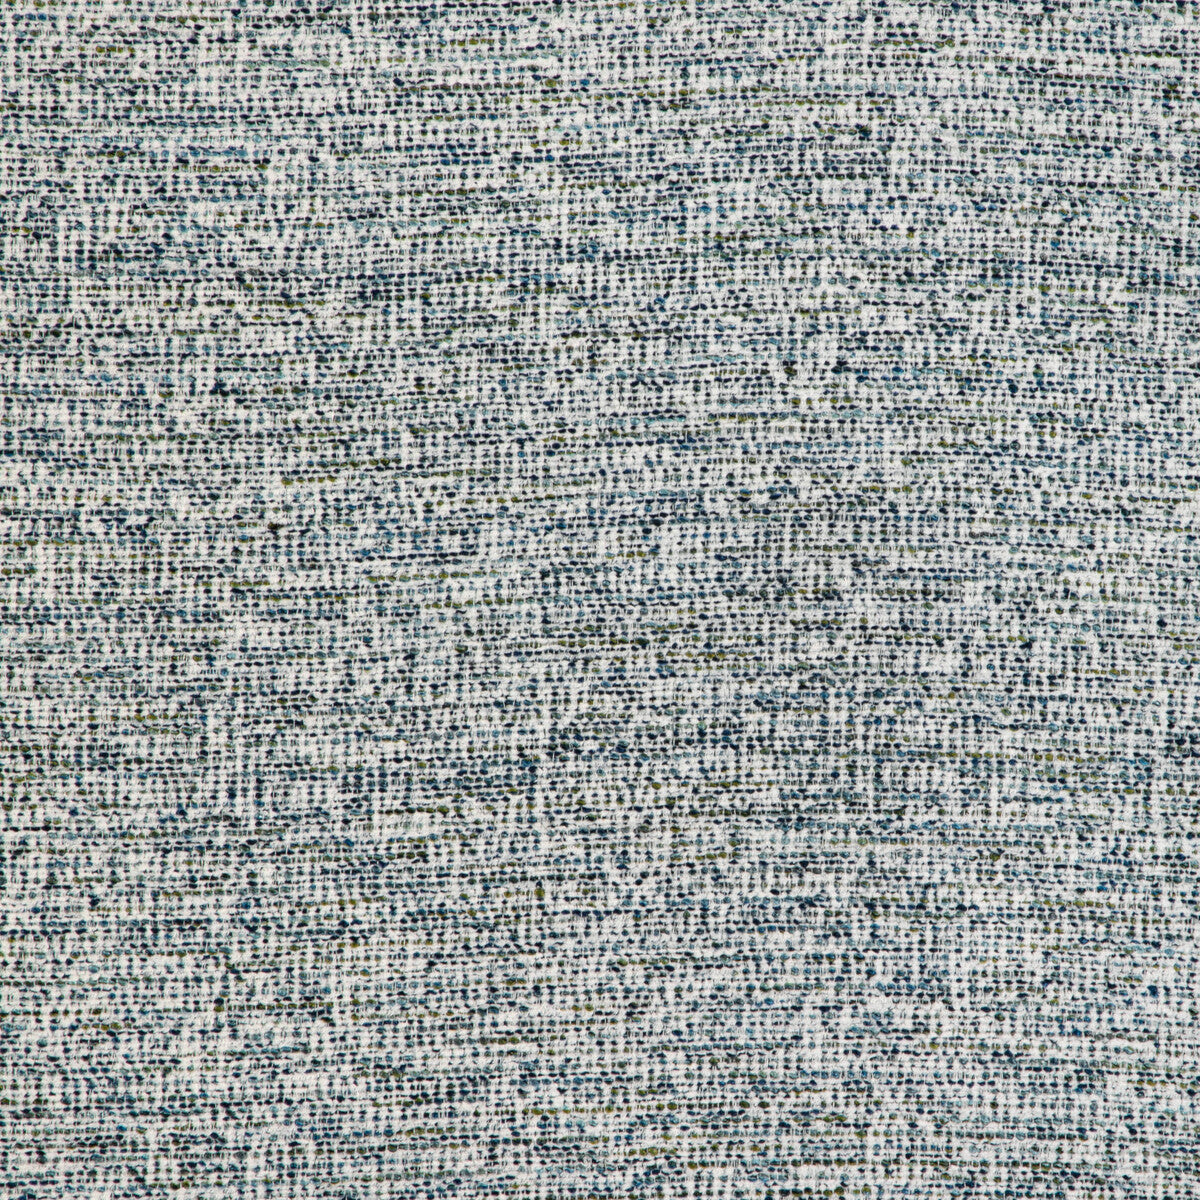 Kravet Design fabric in 36883-315 color - pattern 36883.315.0 - by Kravet Design in the Insideout Seaqual Initiative collection